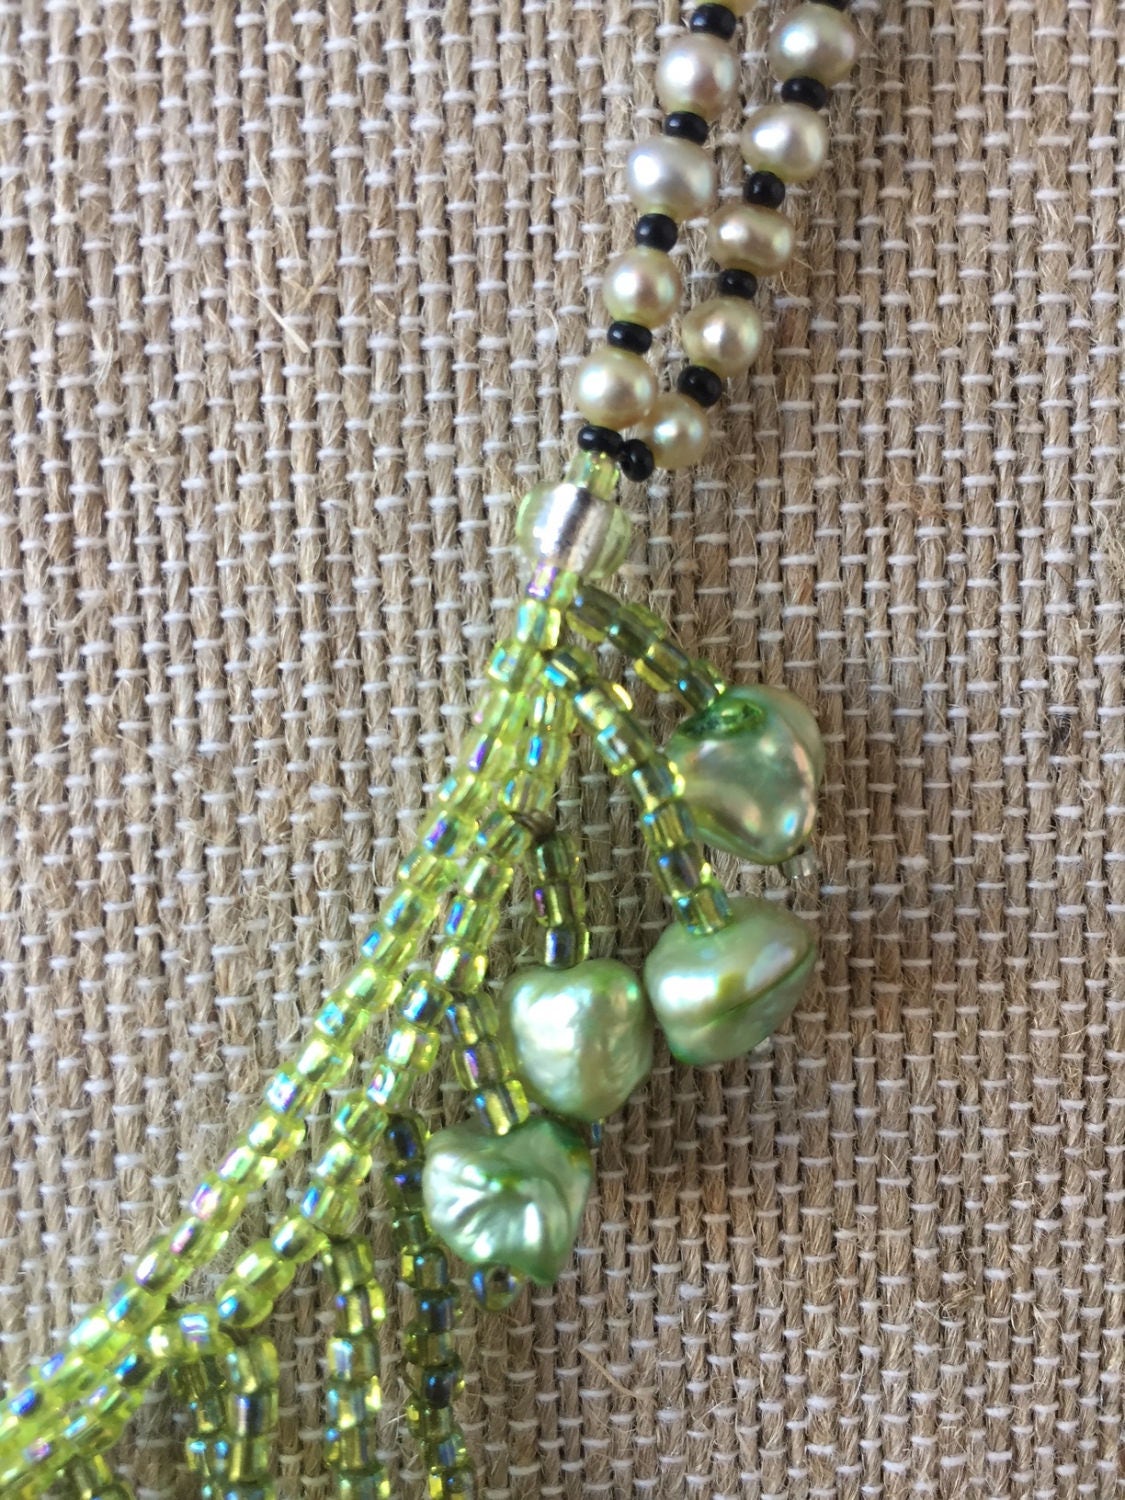 Hand woven pearl necklace. Beautiful flow with pearls and seed beads. Green and white pearls dangle on this necklace made by me in Maine.